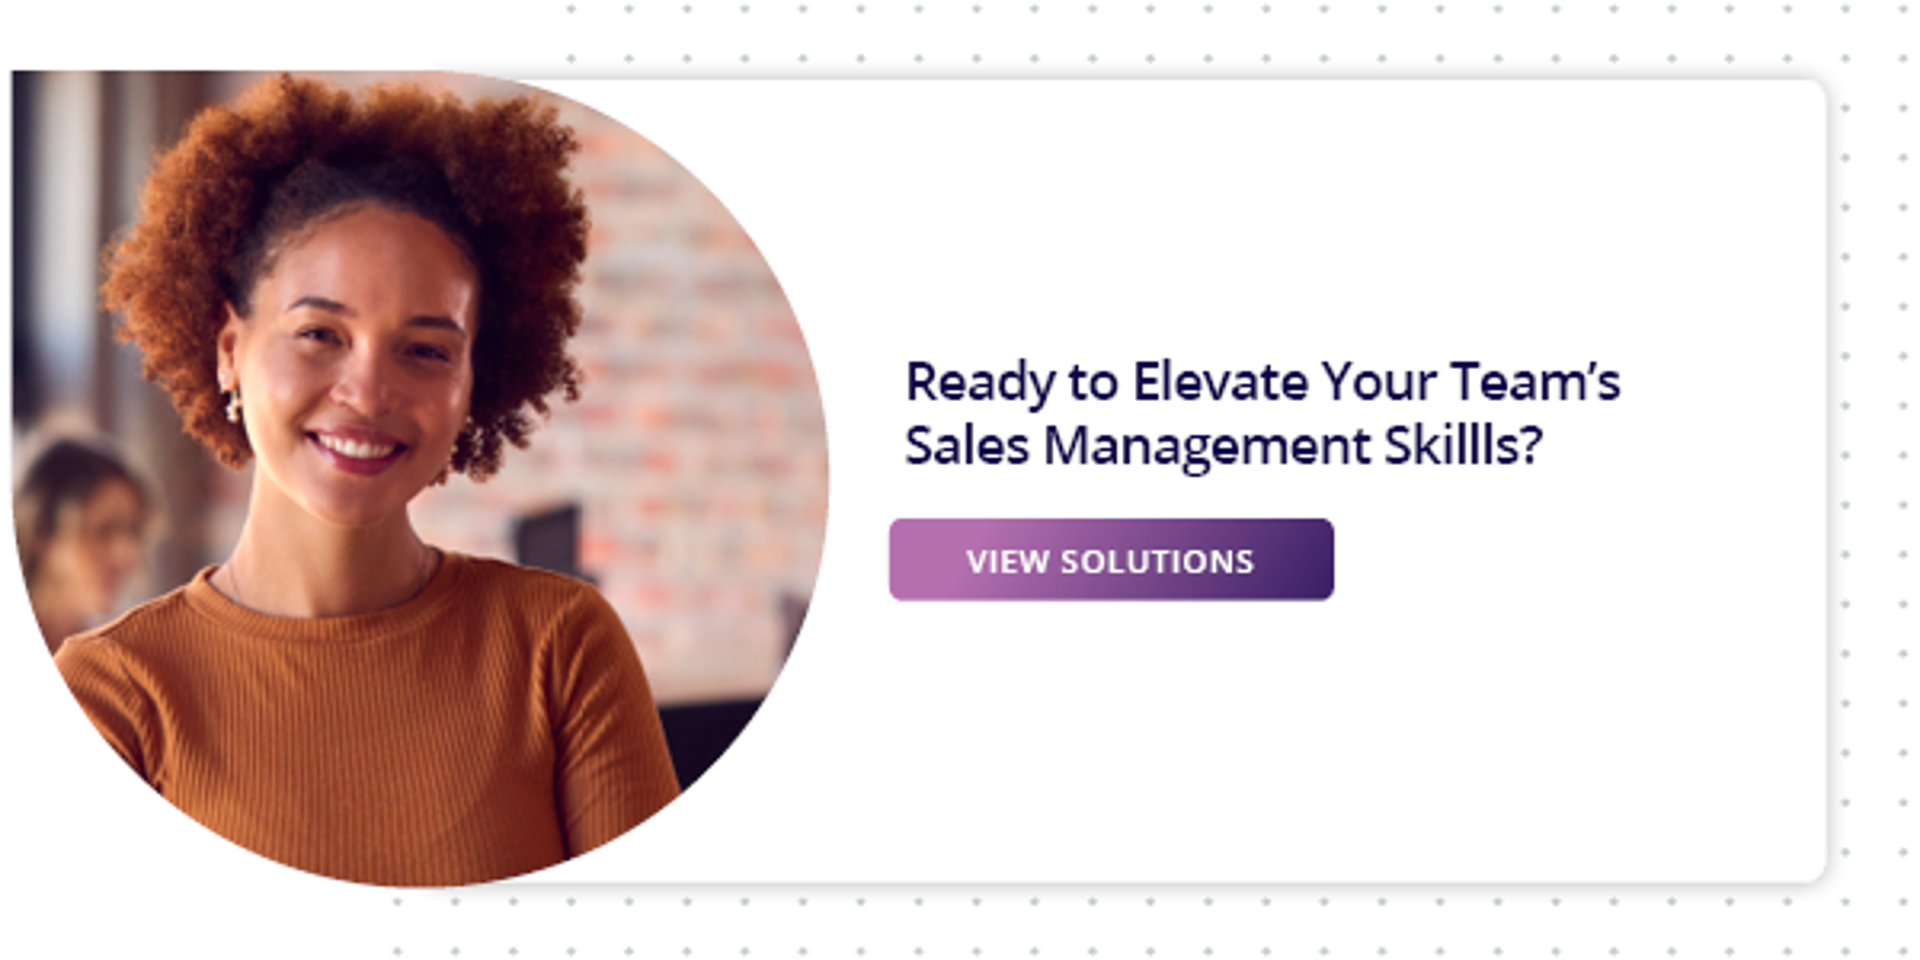 click here to view sales management training solutions from Richardson